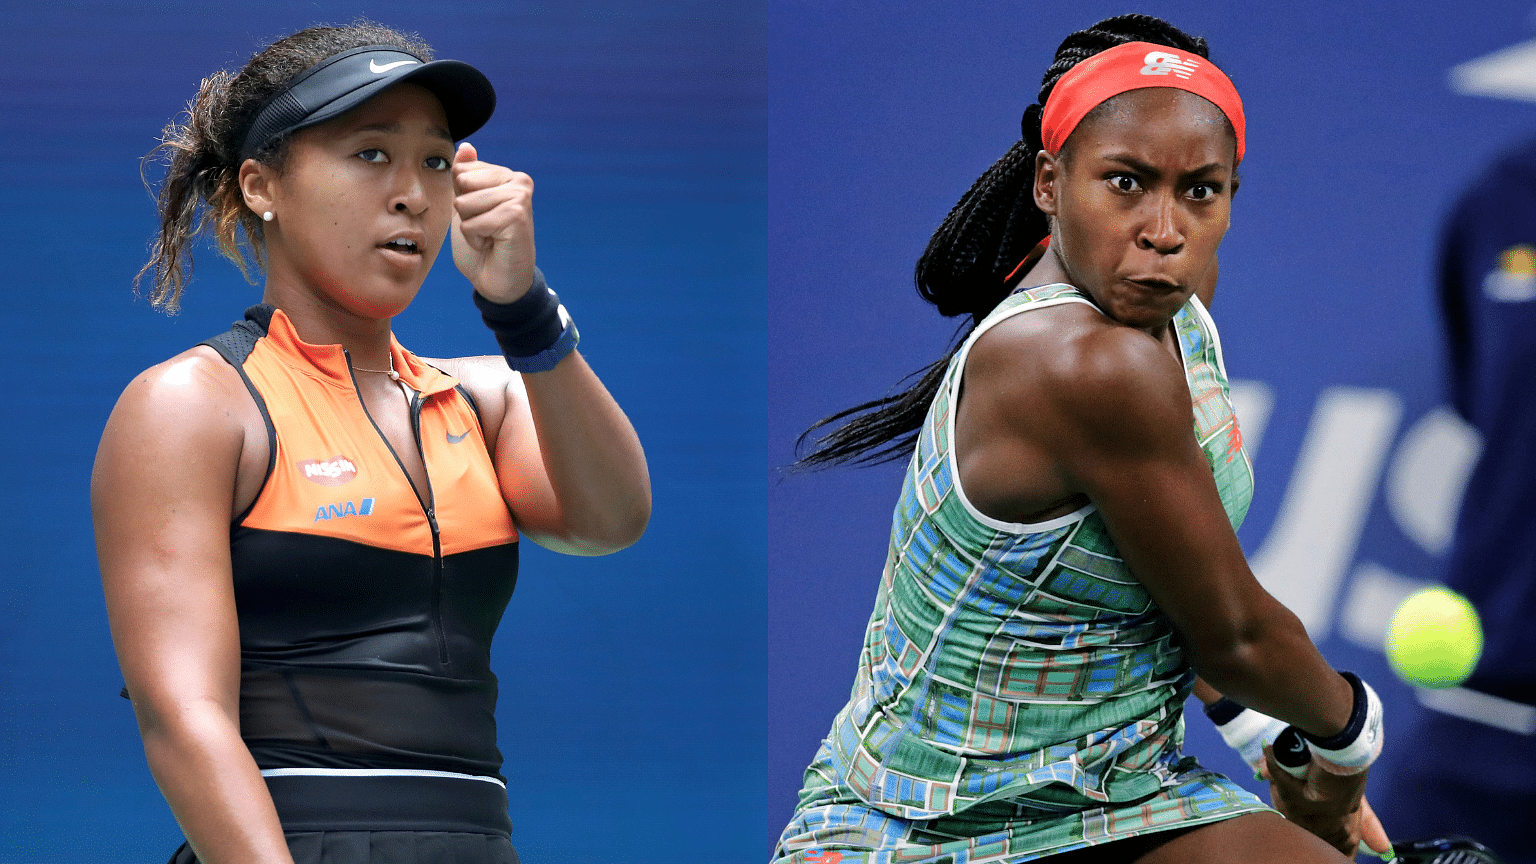 Coco Gauff will play against No. 1 seed and defending champion Naomi Osaka in the third round of the US Open.